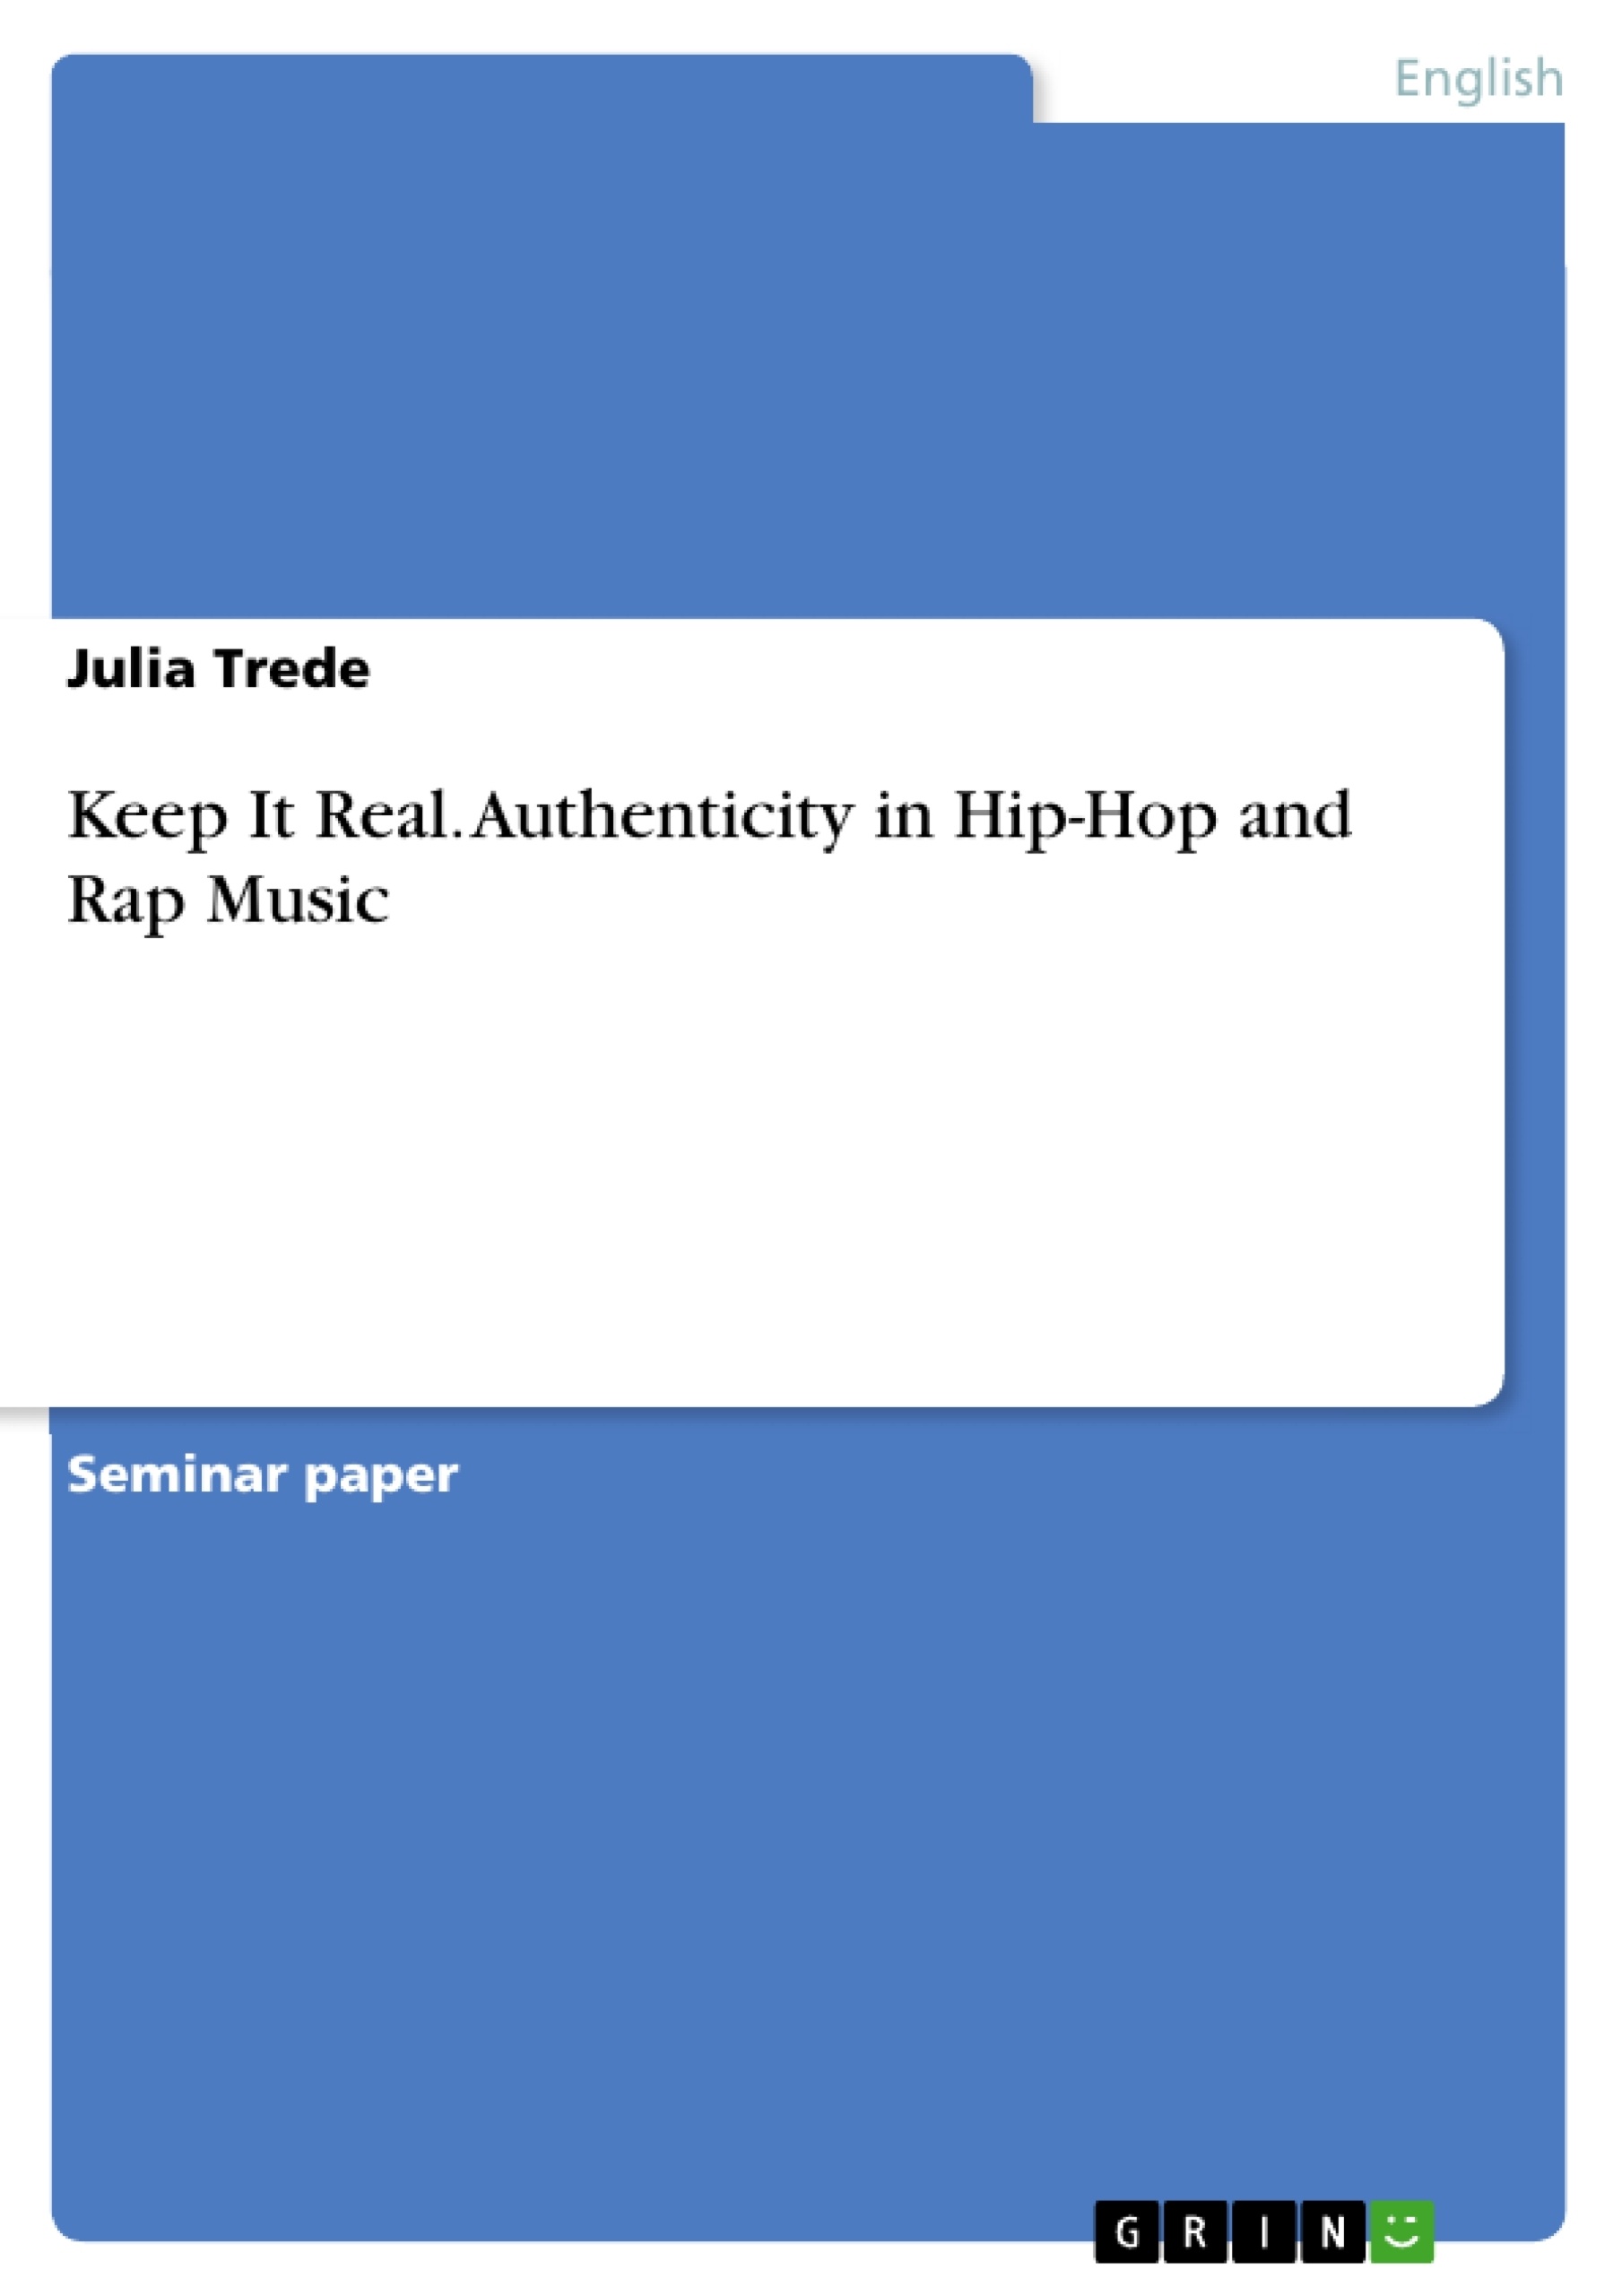 Title: Keep It Real. Authenticity in Hip-Hop and Rap Music